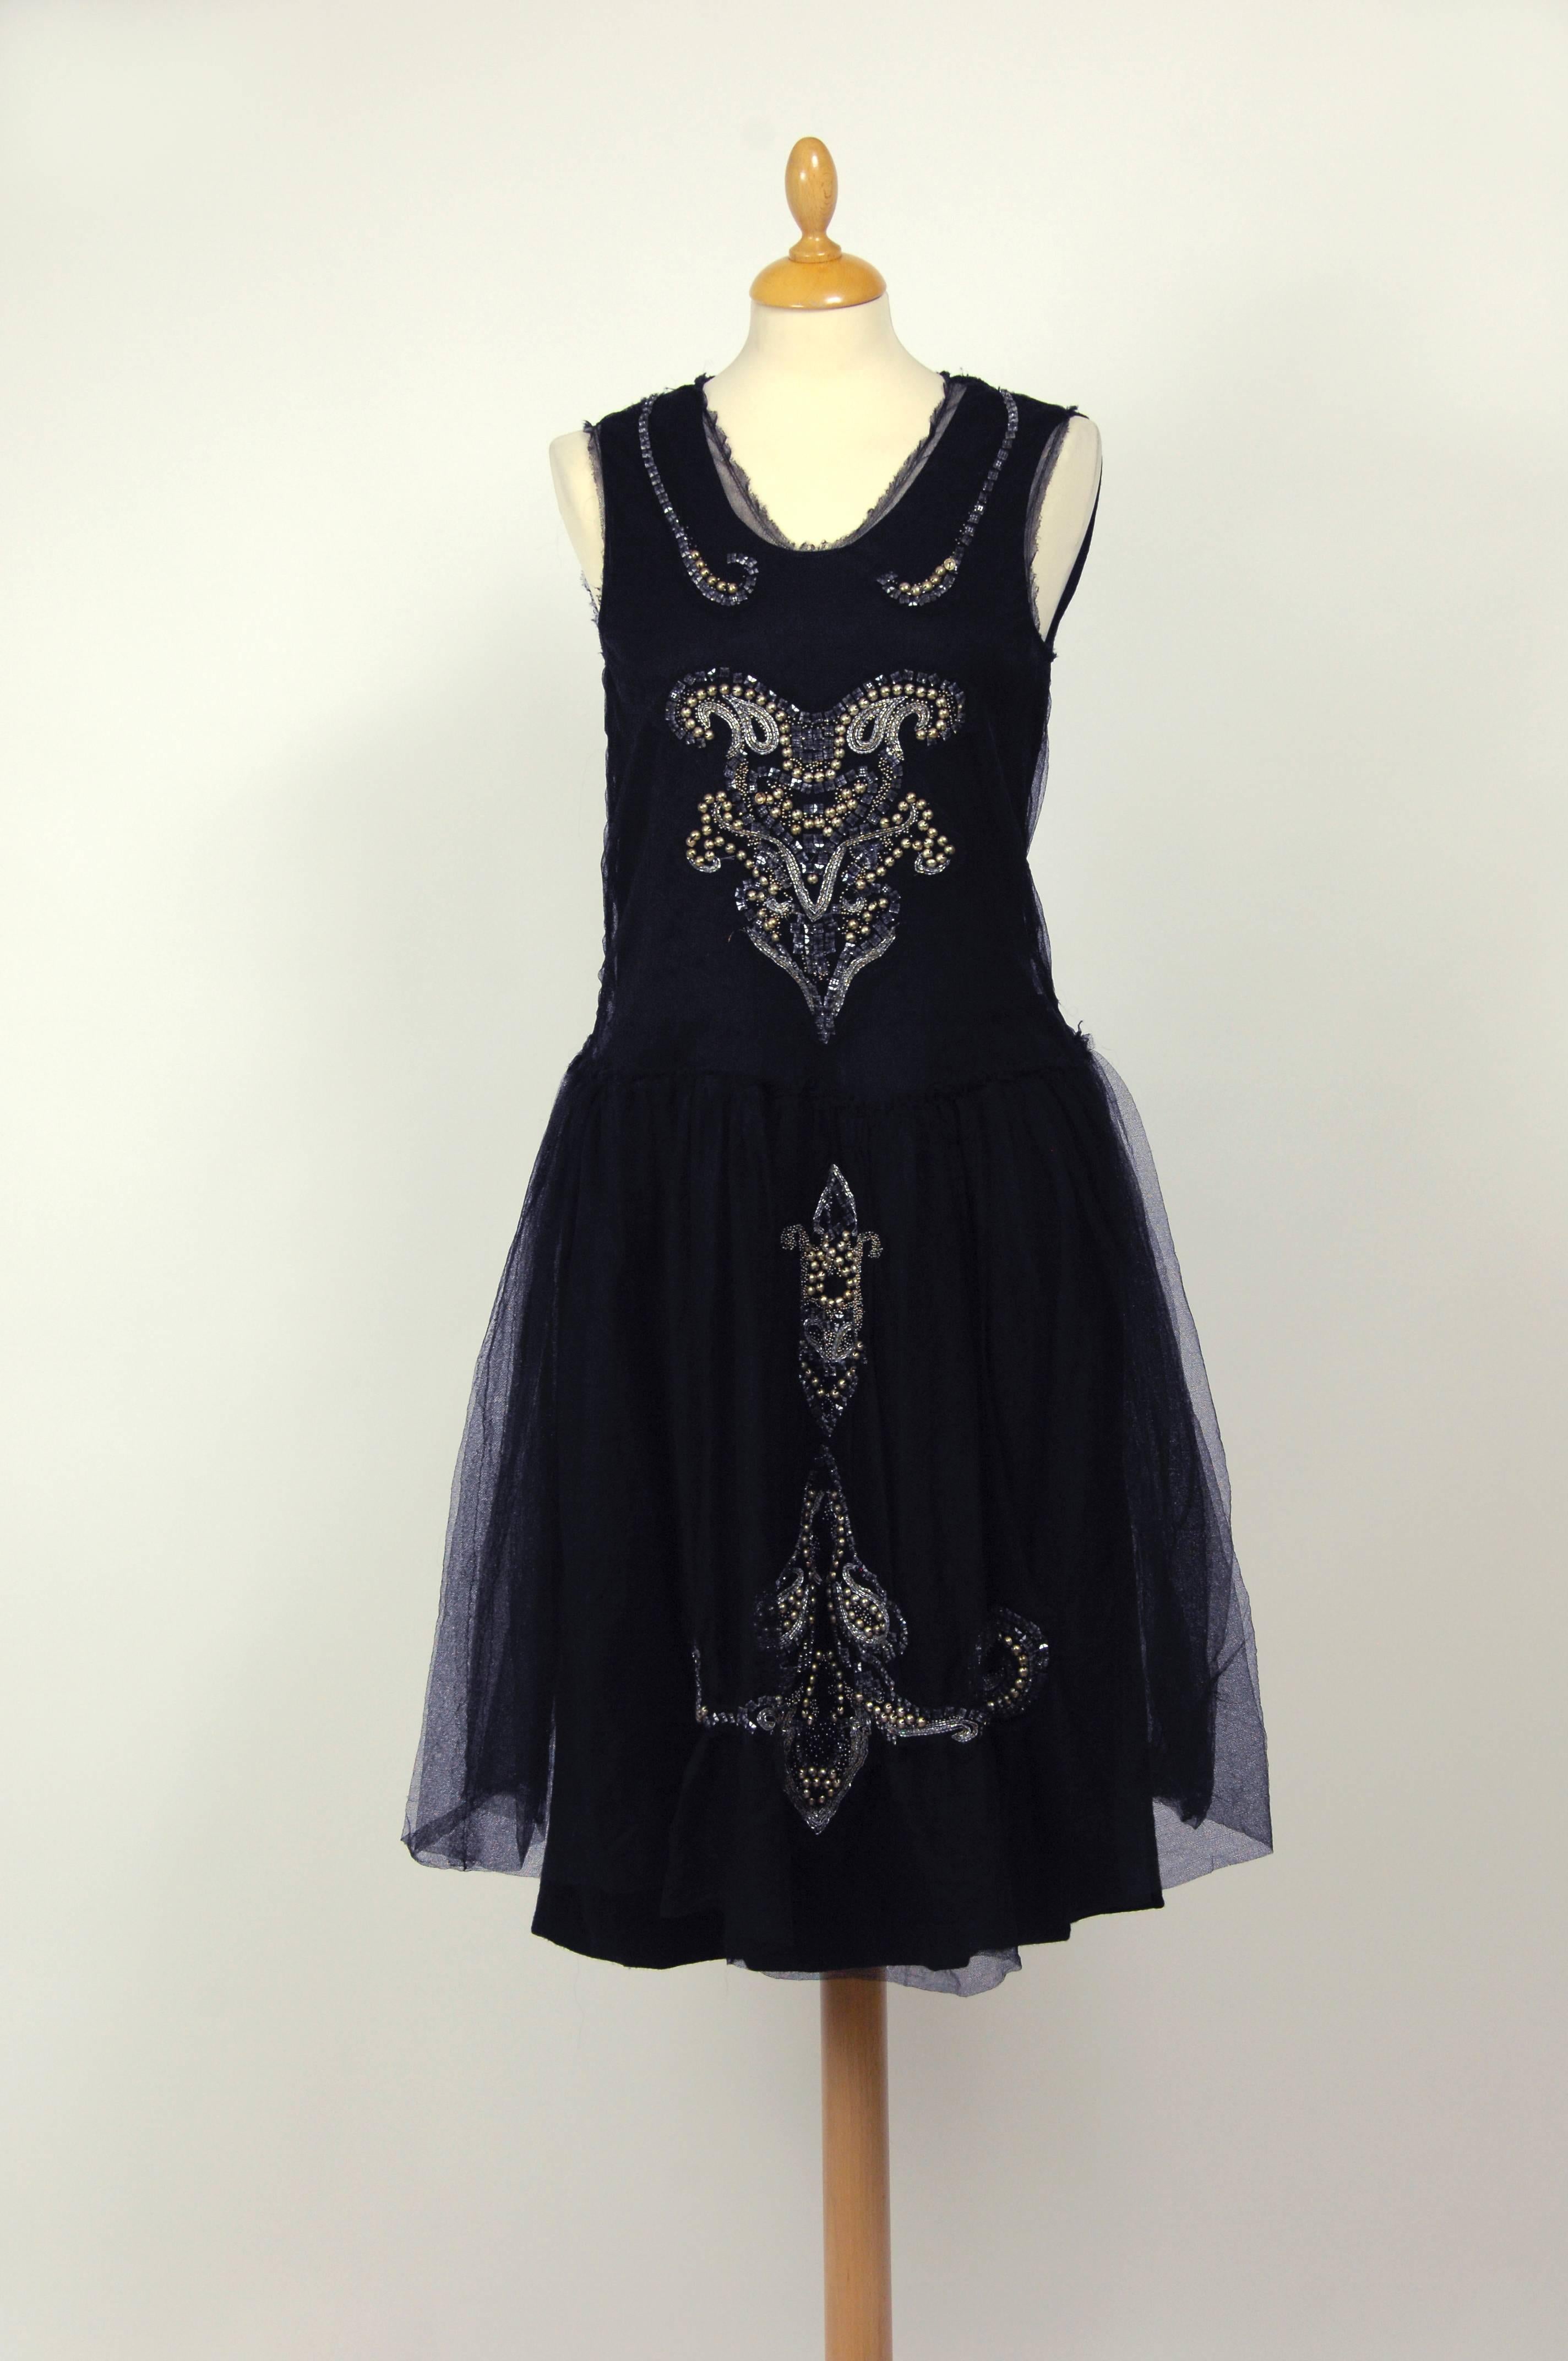 This gorgeous Lanvin dress has a dress in a black woolen fabric and a 20s style dress in a black tulle fabric. The woolen dress is sleeveless and has side zip closure and crinoline hips and skirt lined. The tulle dress is sleeveless and embroidered